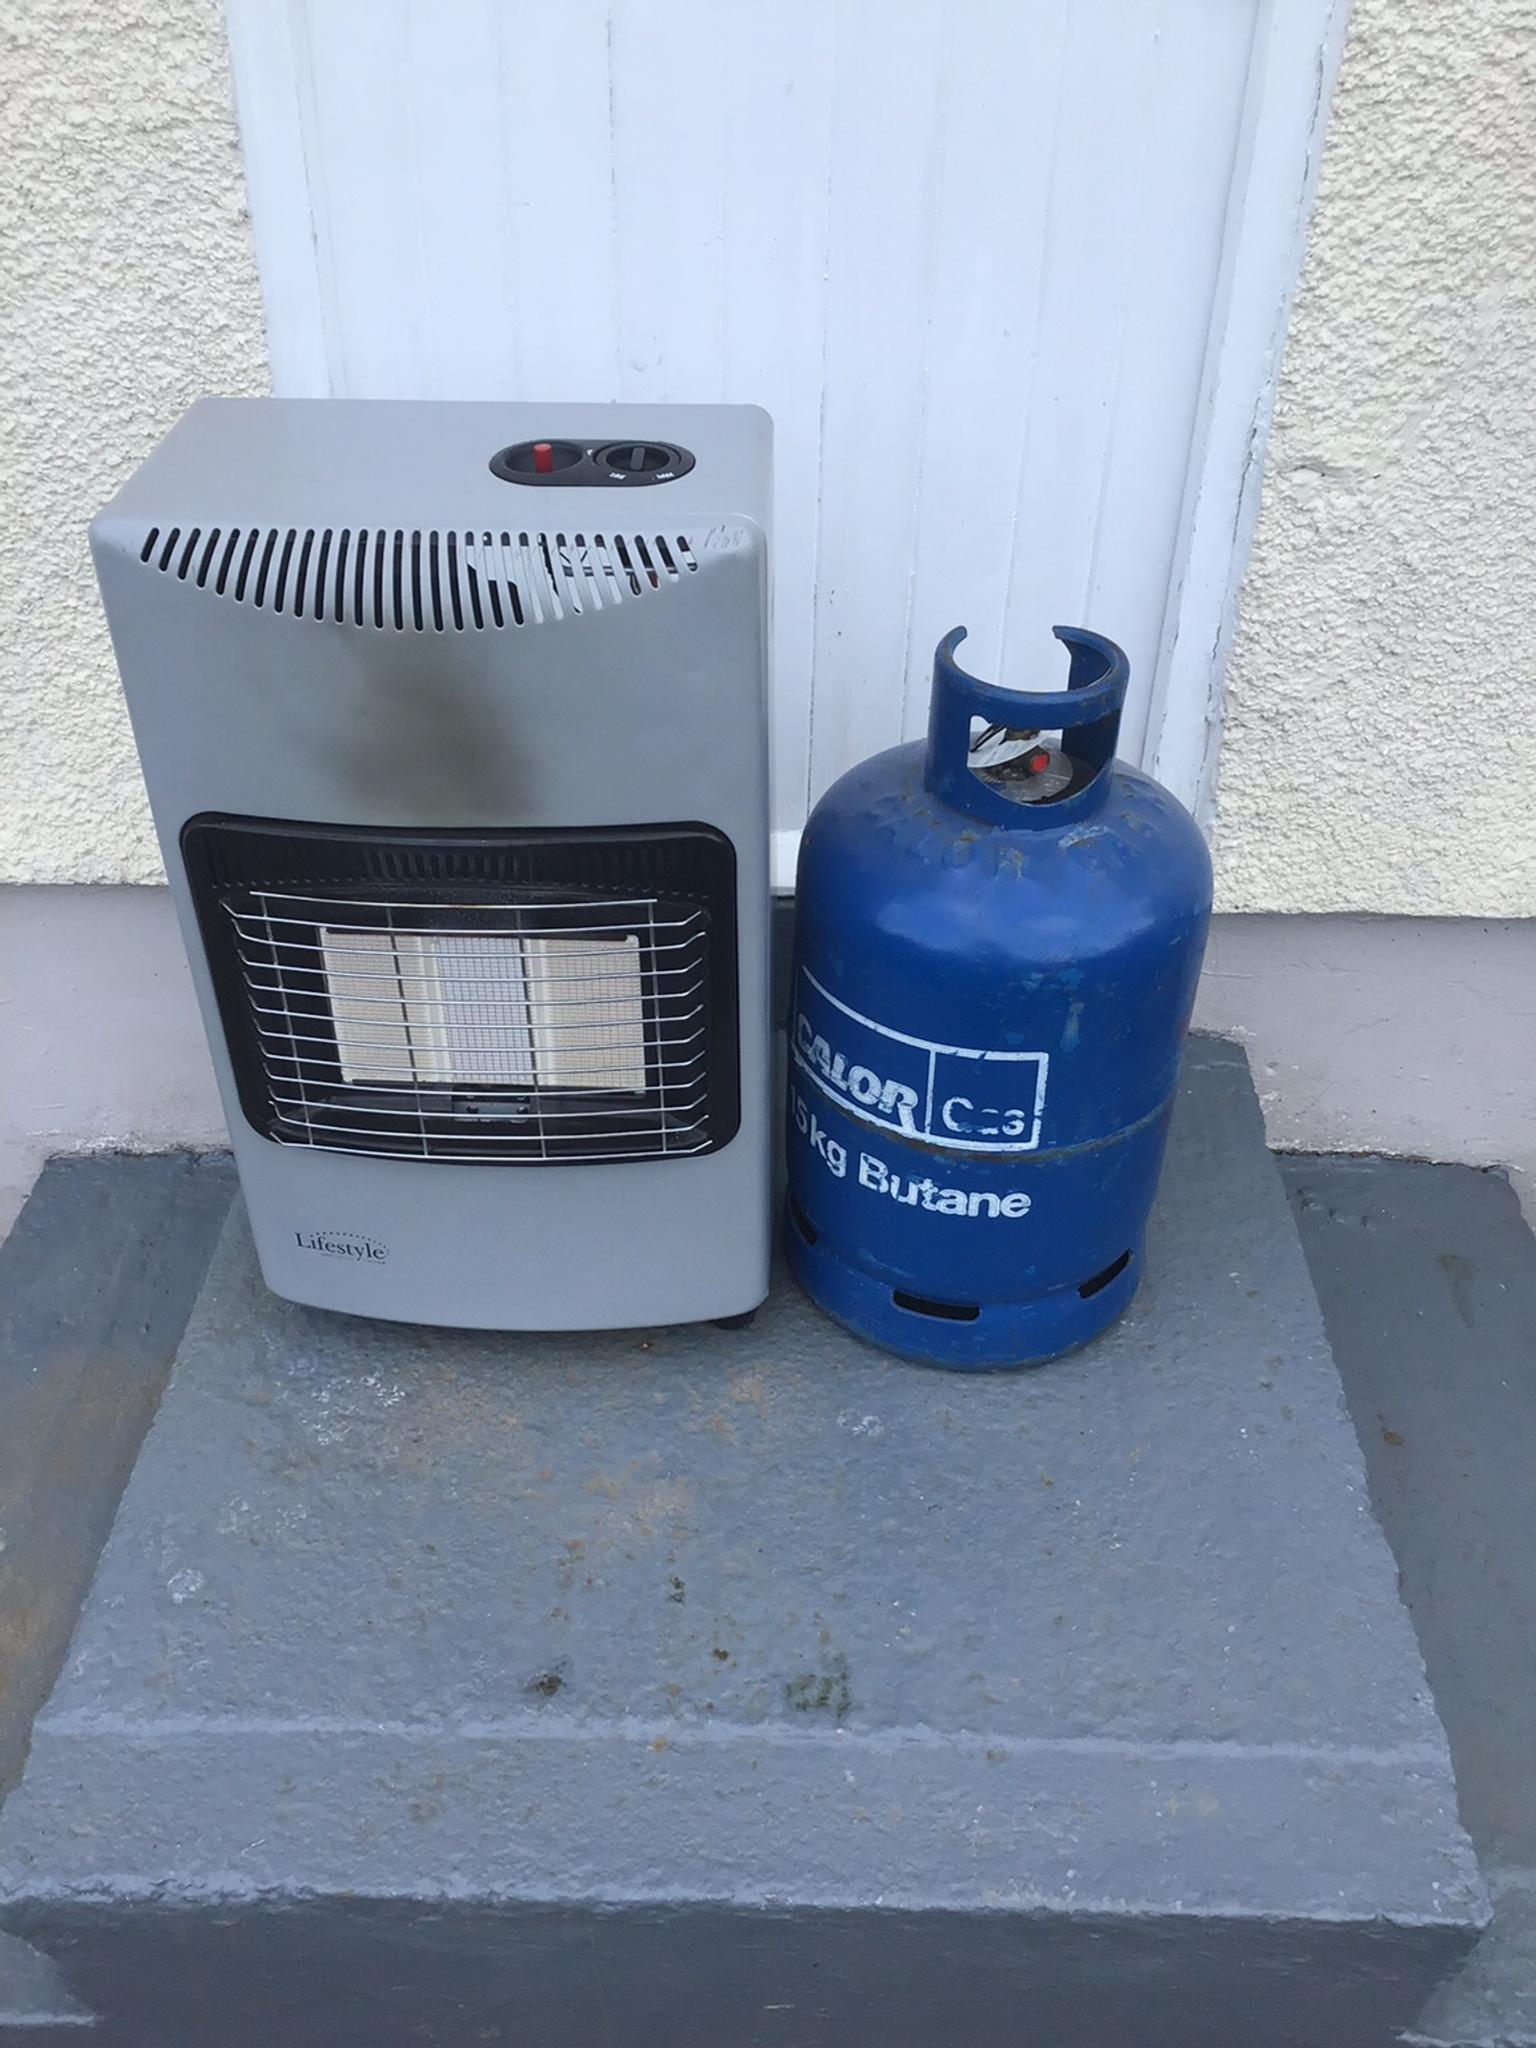 Calor Gas Heater in LL68 Bay for £20.00 for sale Shpock